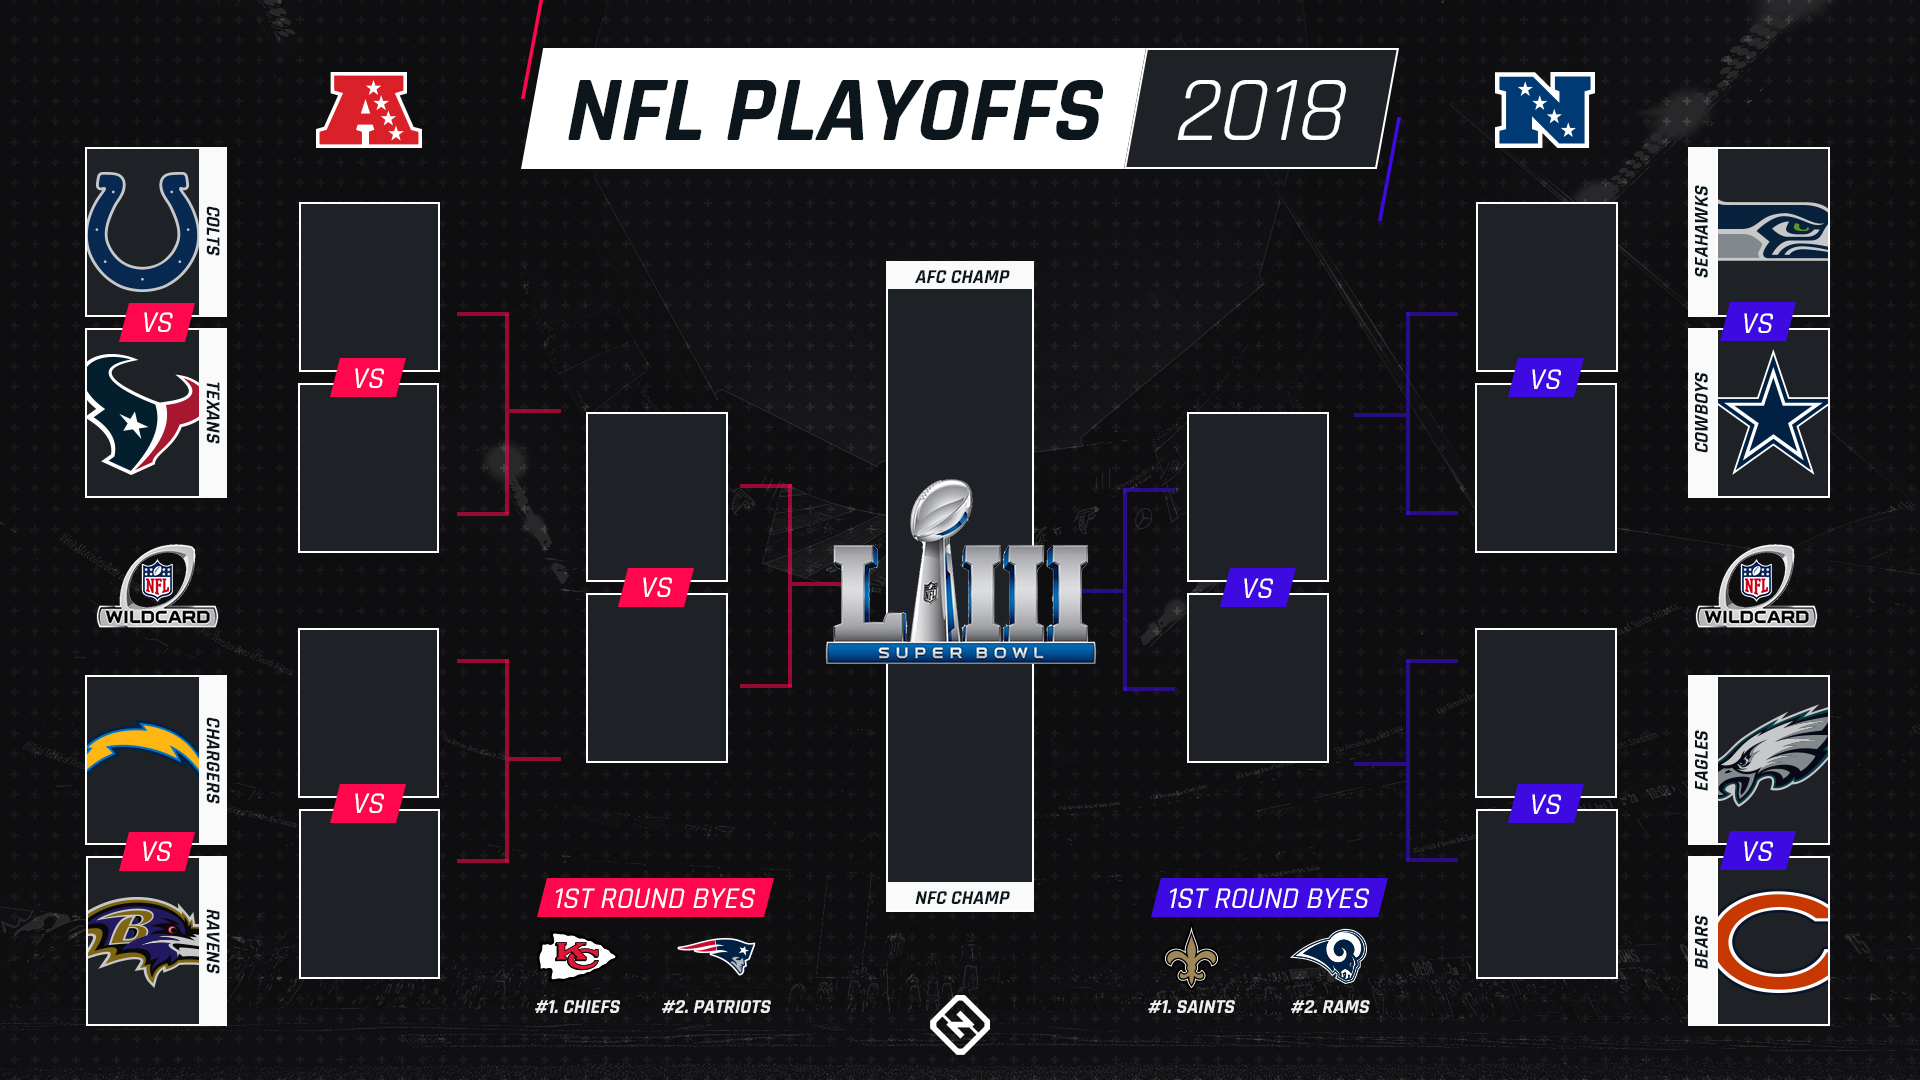 NFL playoff schedule: Dates, times, TV channels for every 2019